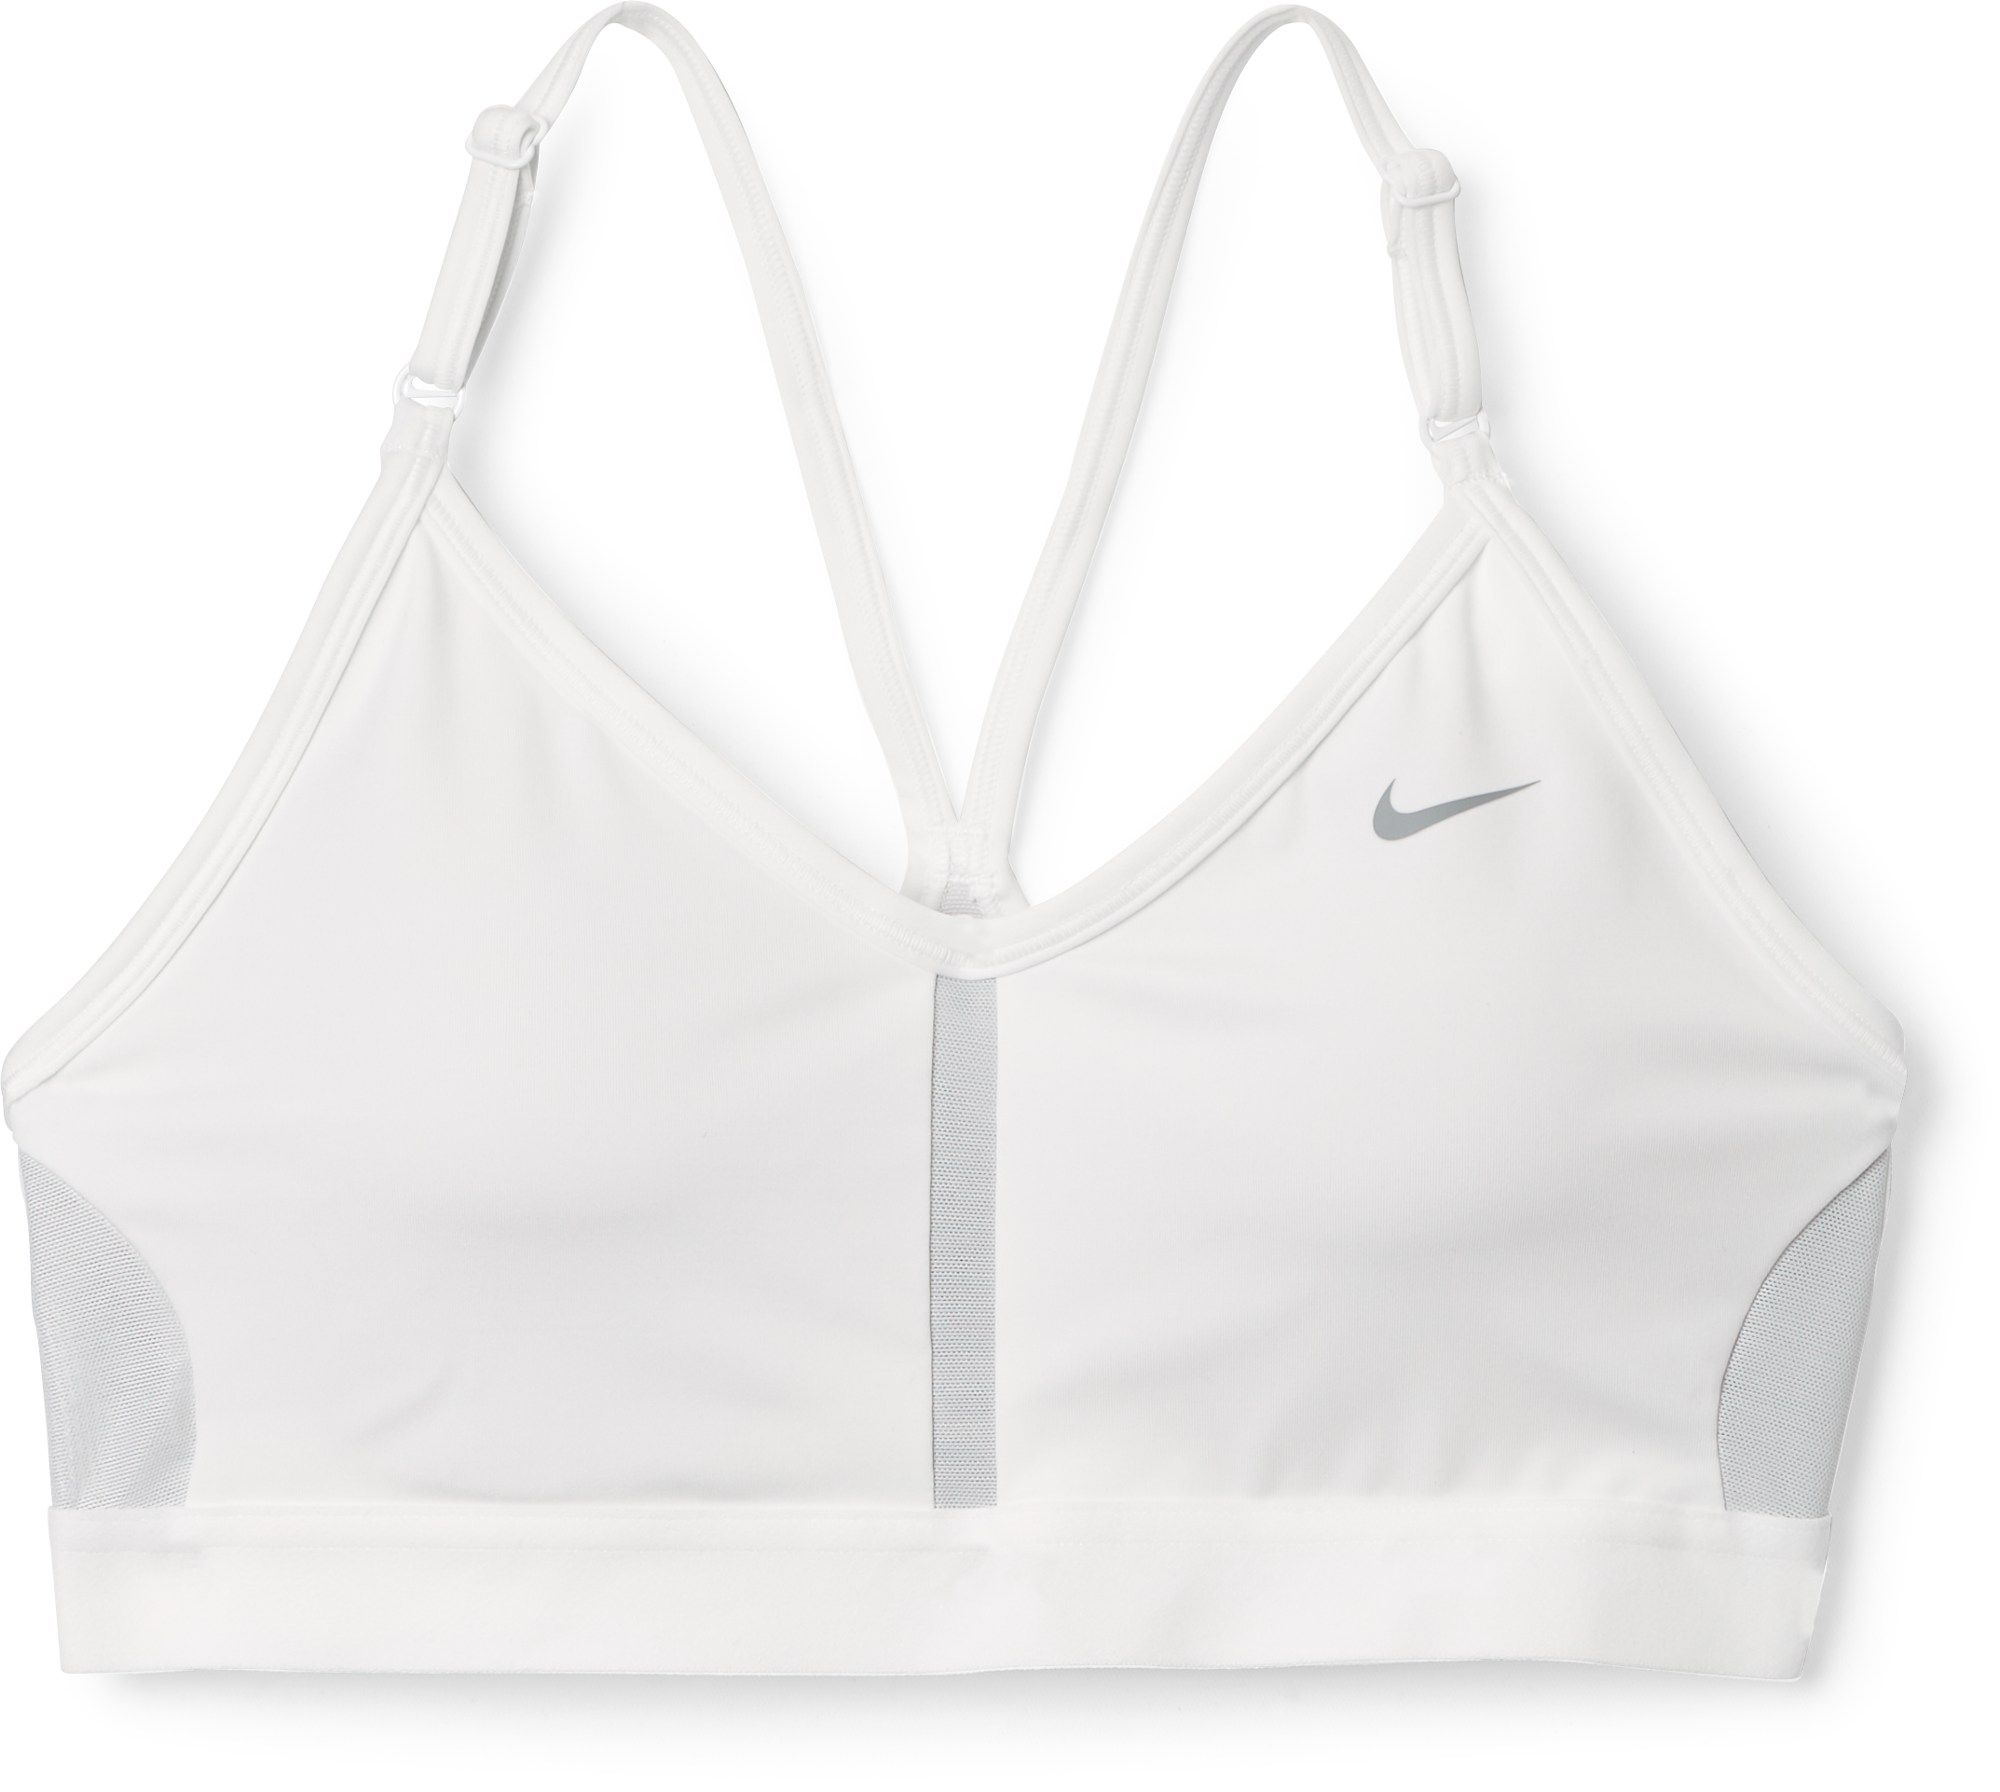 Supportive Sports Bras for Active Lifestyles